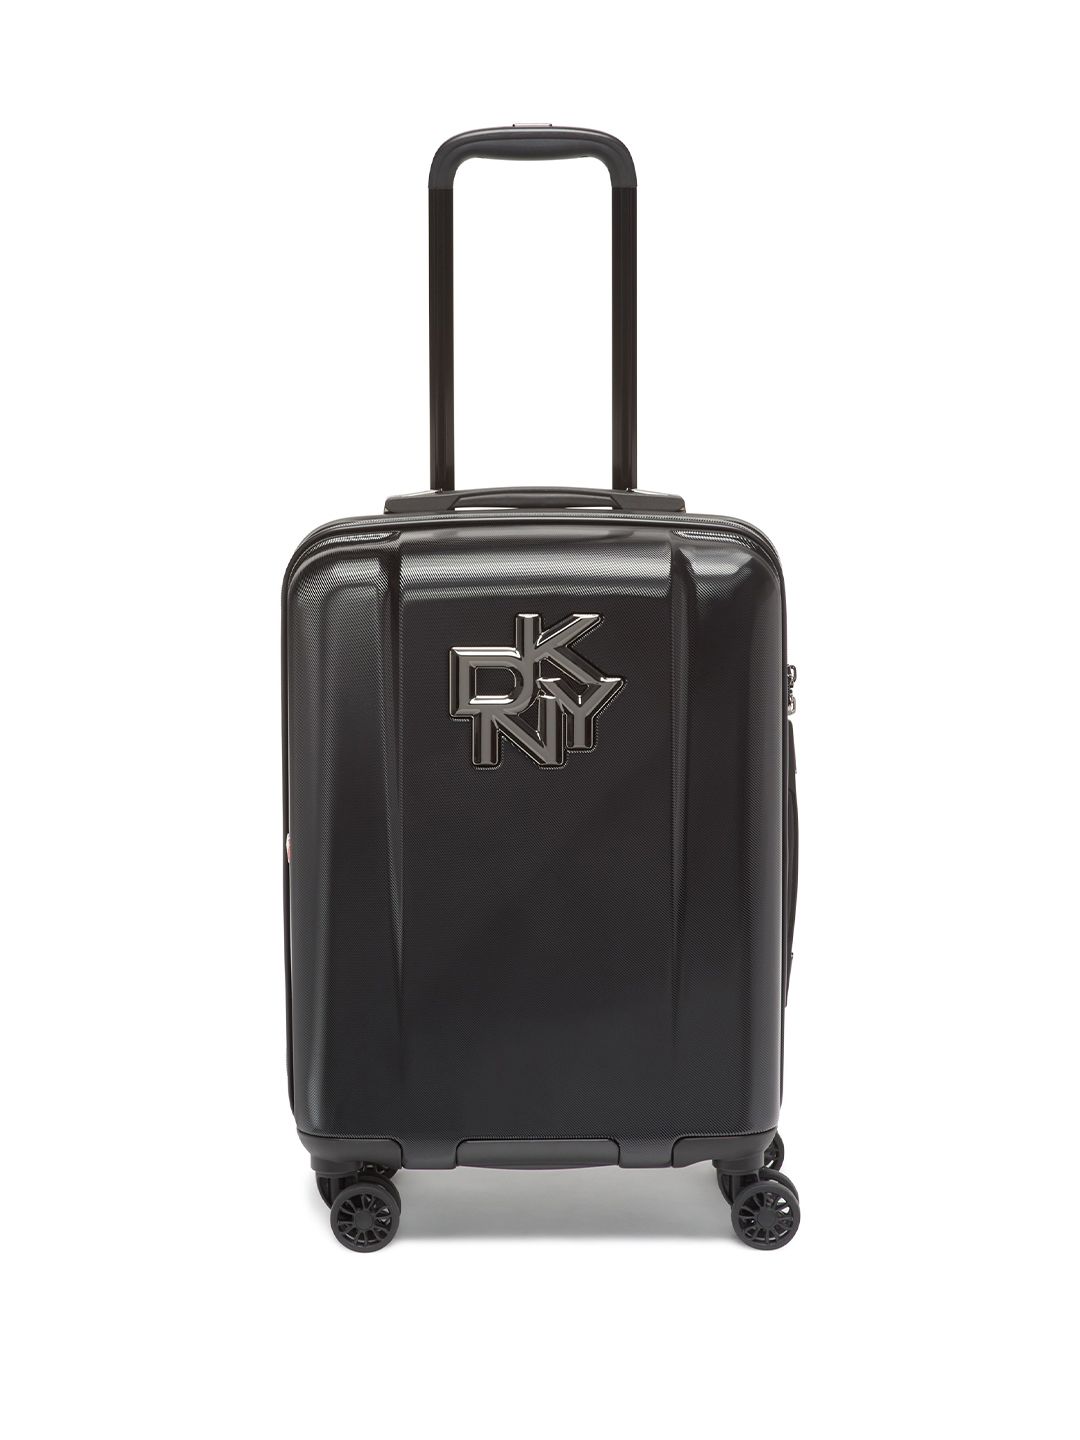 DKNY Black Hard-Sided Medium Trolley Suitcase Price in India